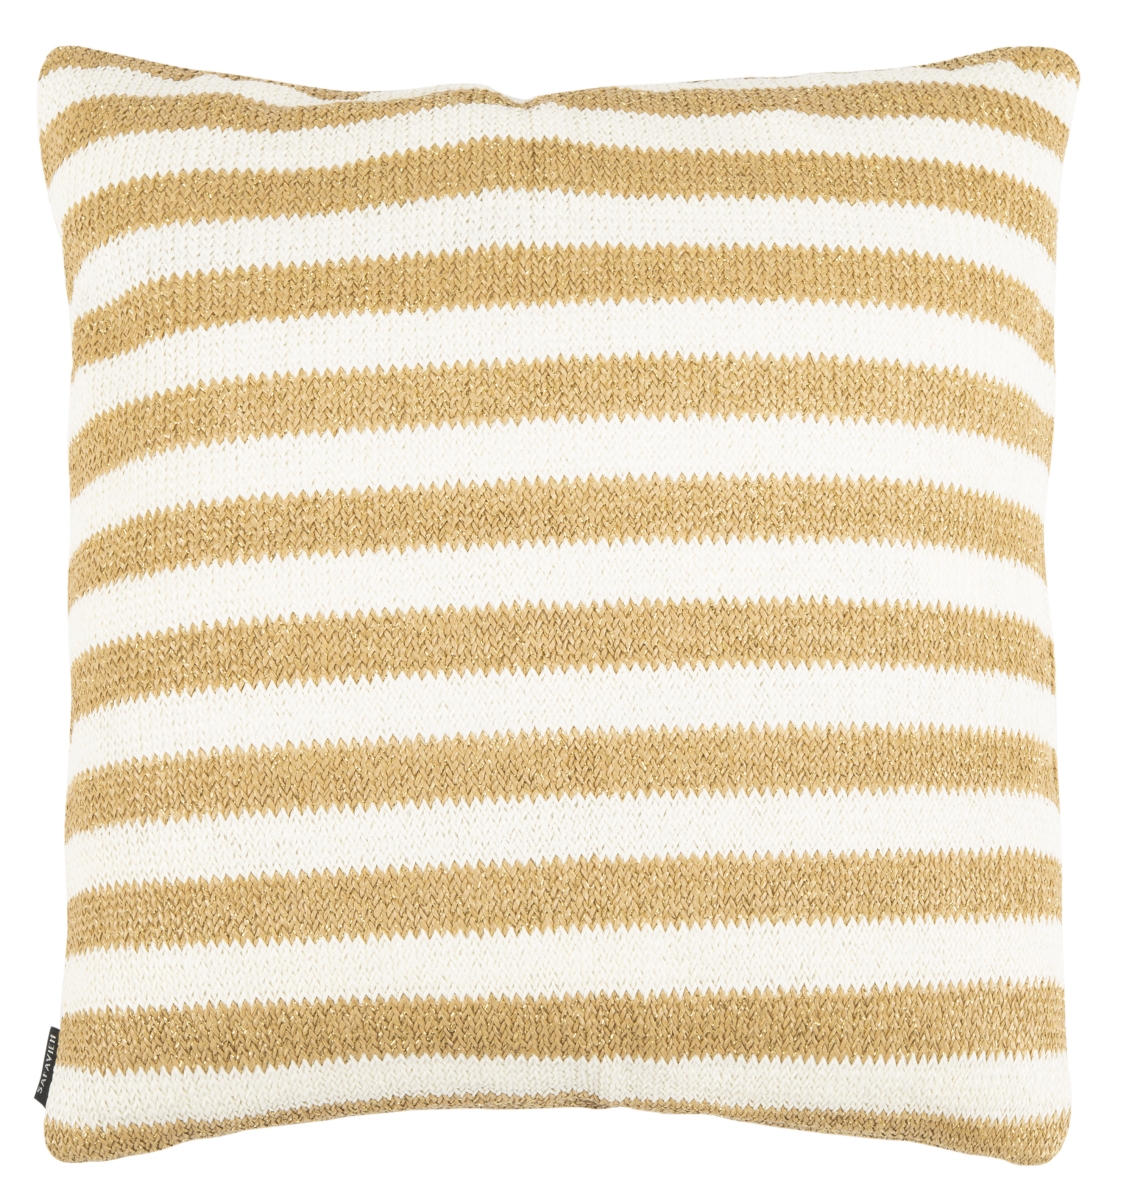 Ppl259a-2020 20 X 20 In. Glenna Pillow, Gold & White